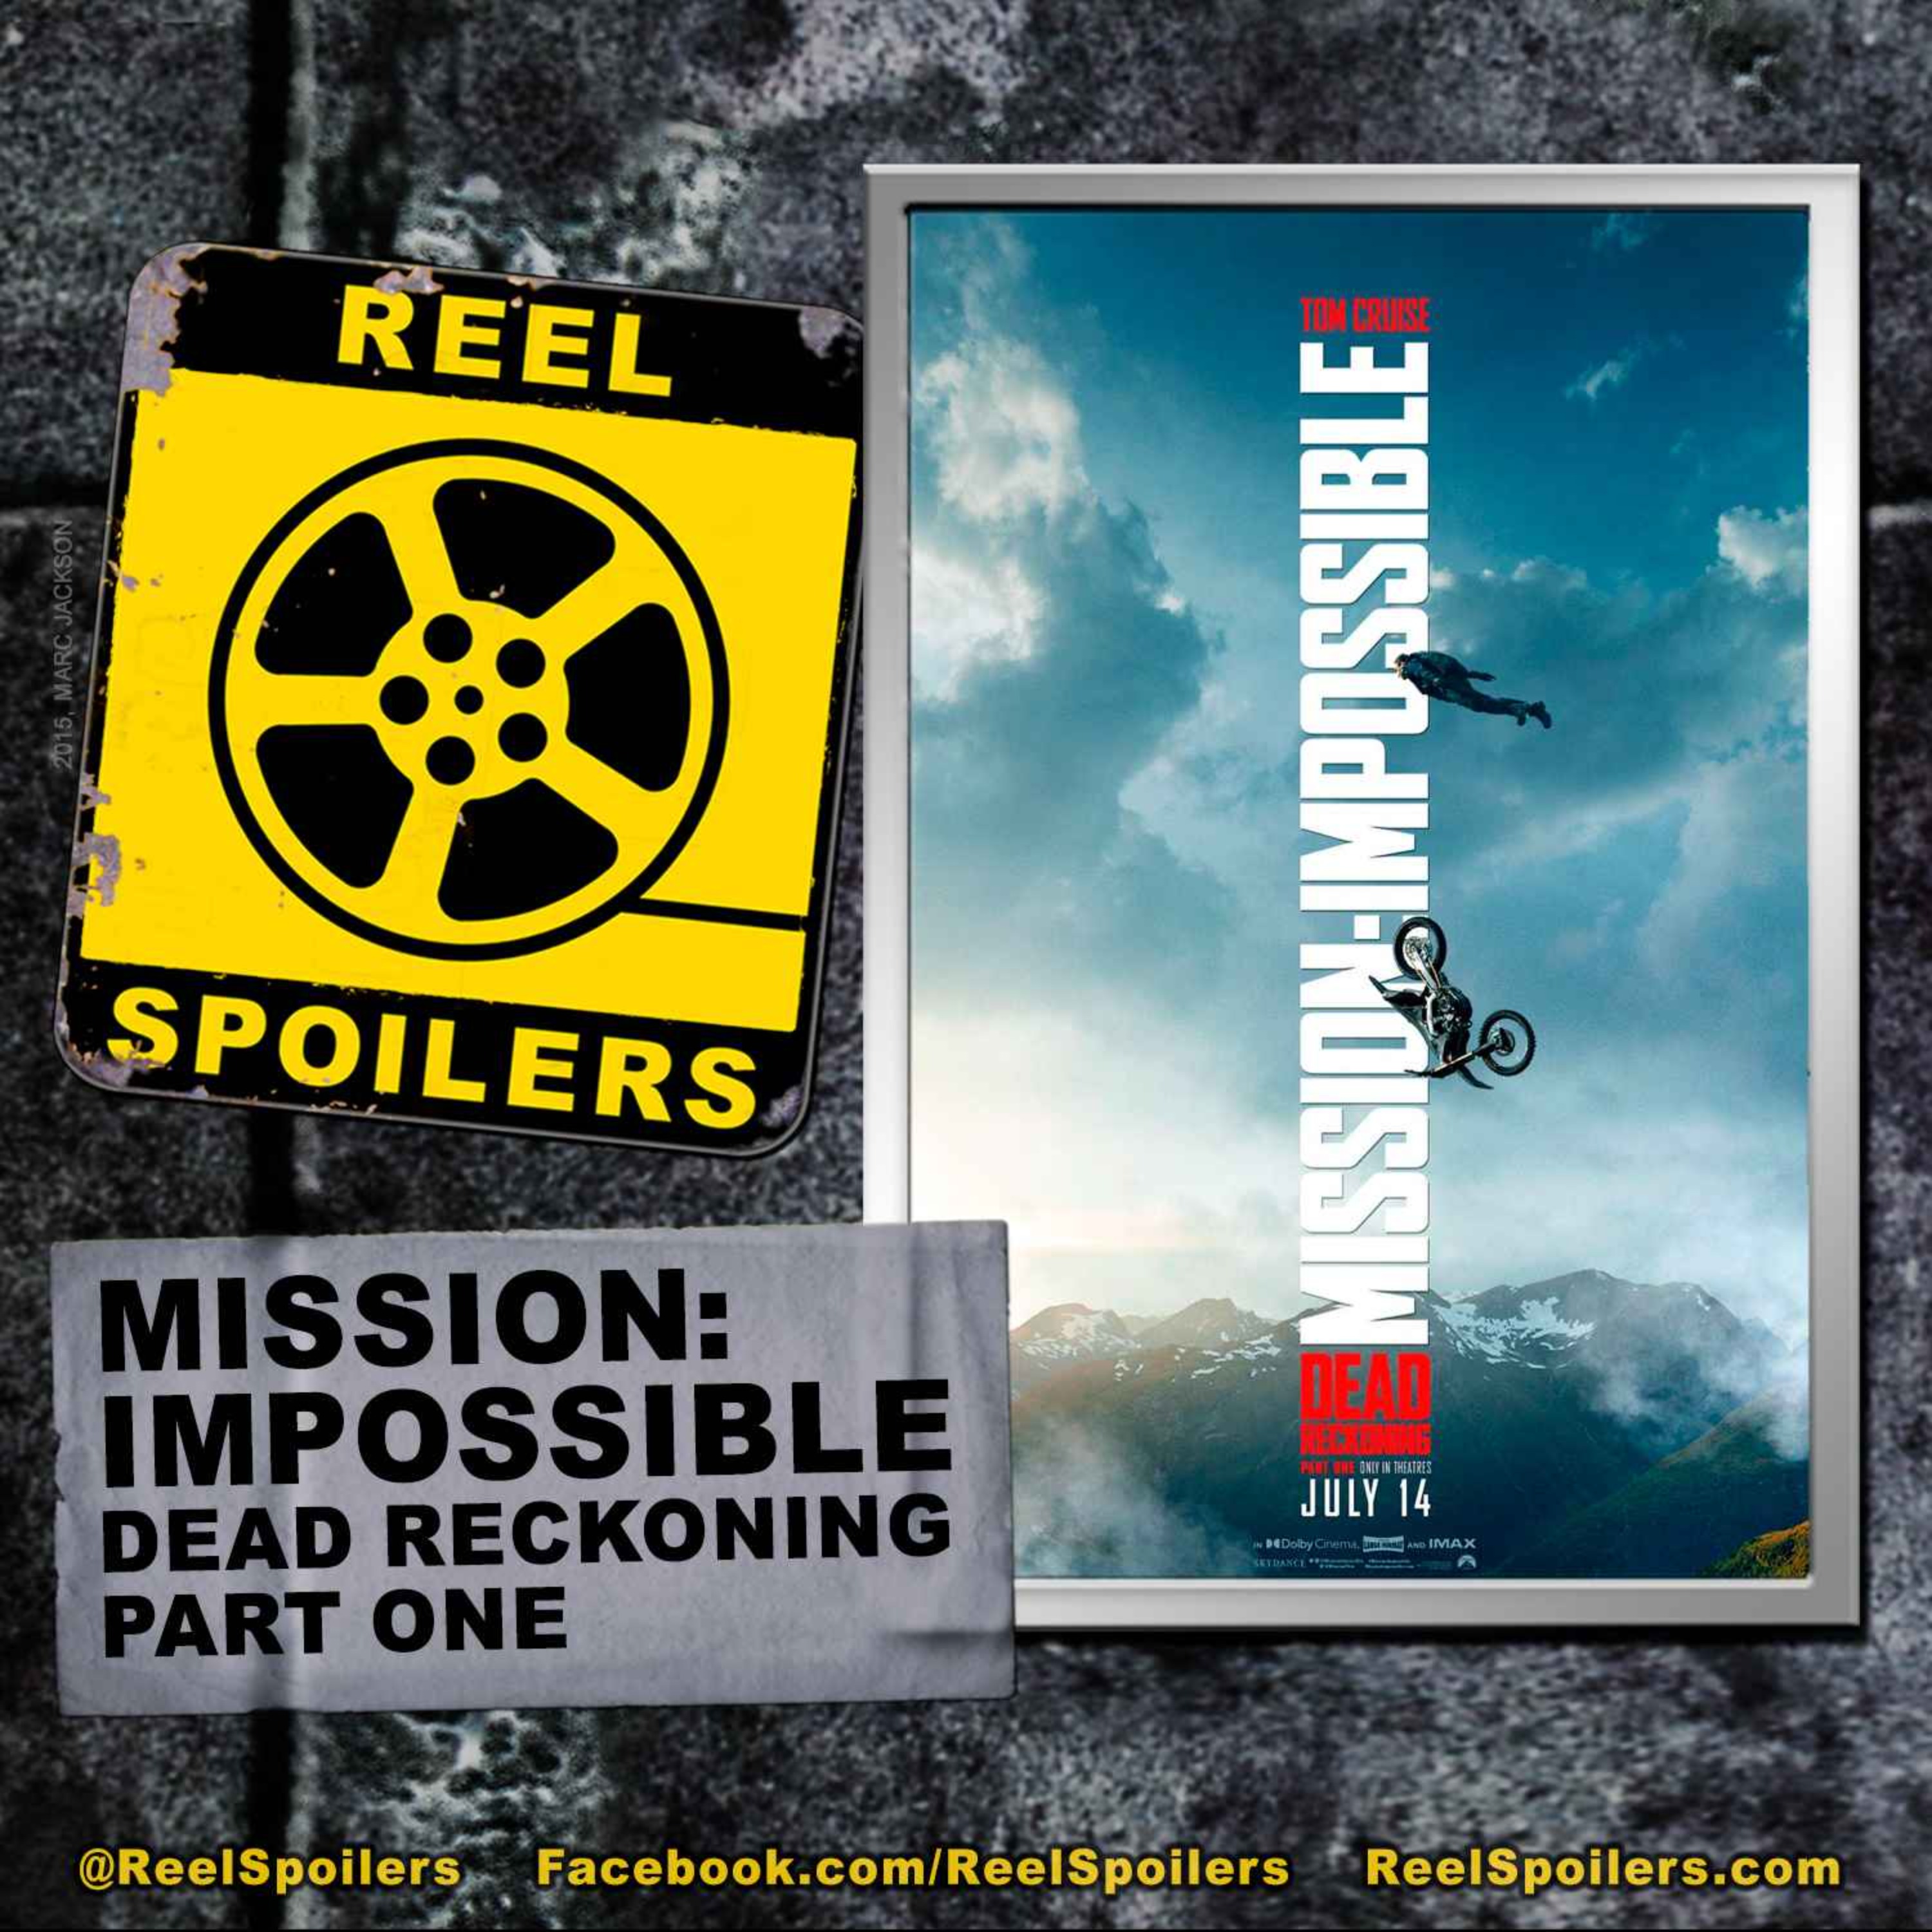 MISSION: IMPOSSIBLE DEAD RECKONING PART ONE Starring Tom Cruise, Hayley Atwell, Rebecca Ferguson